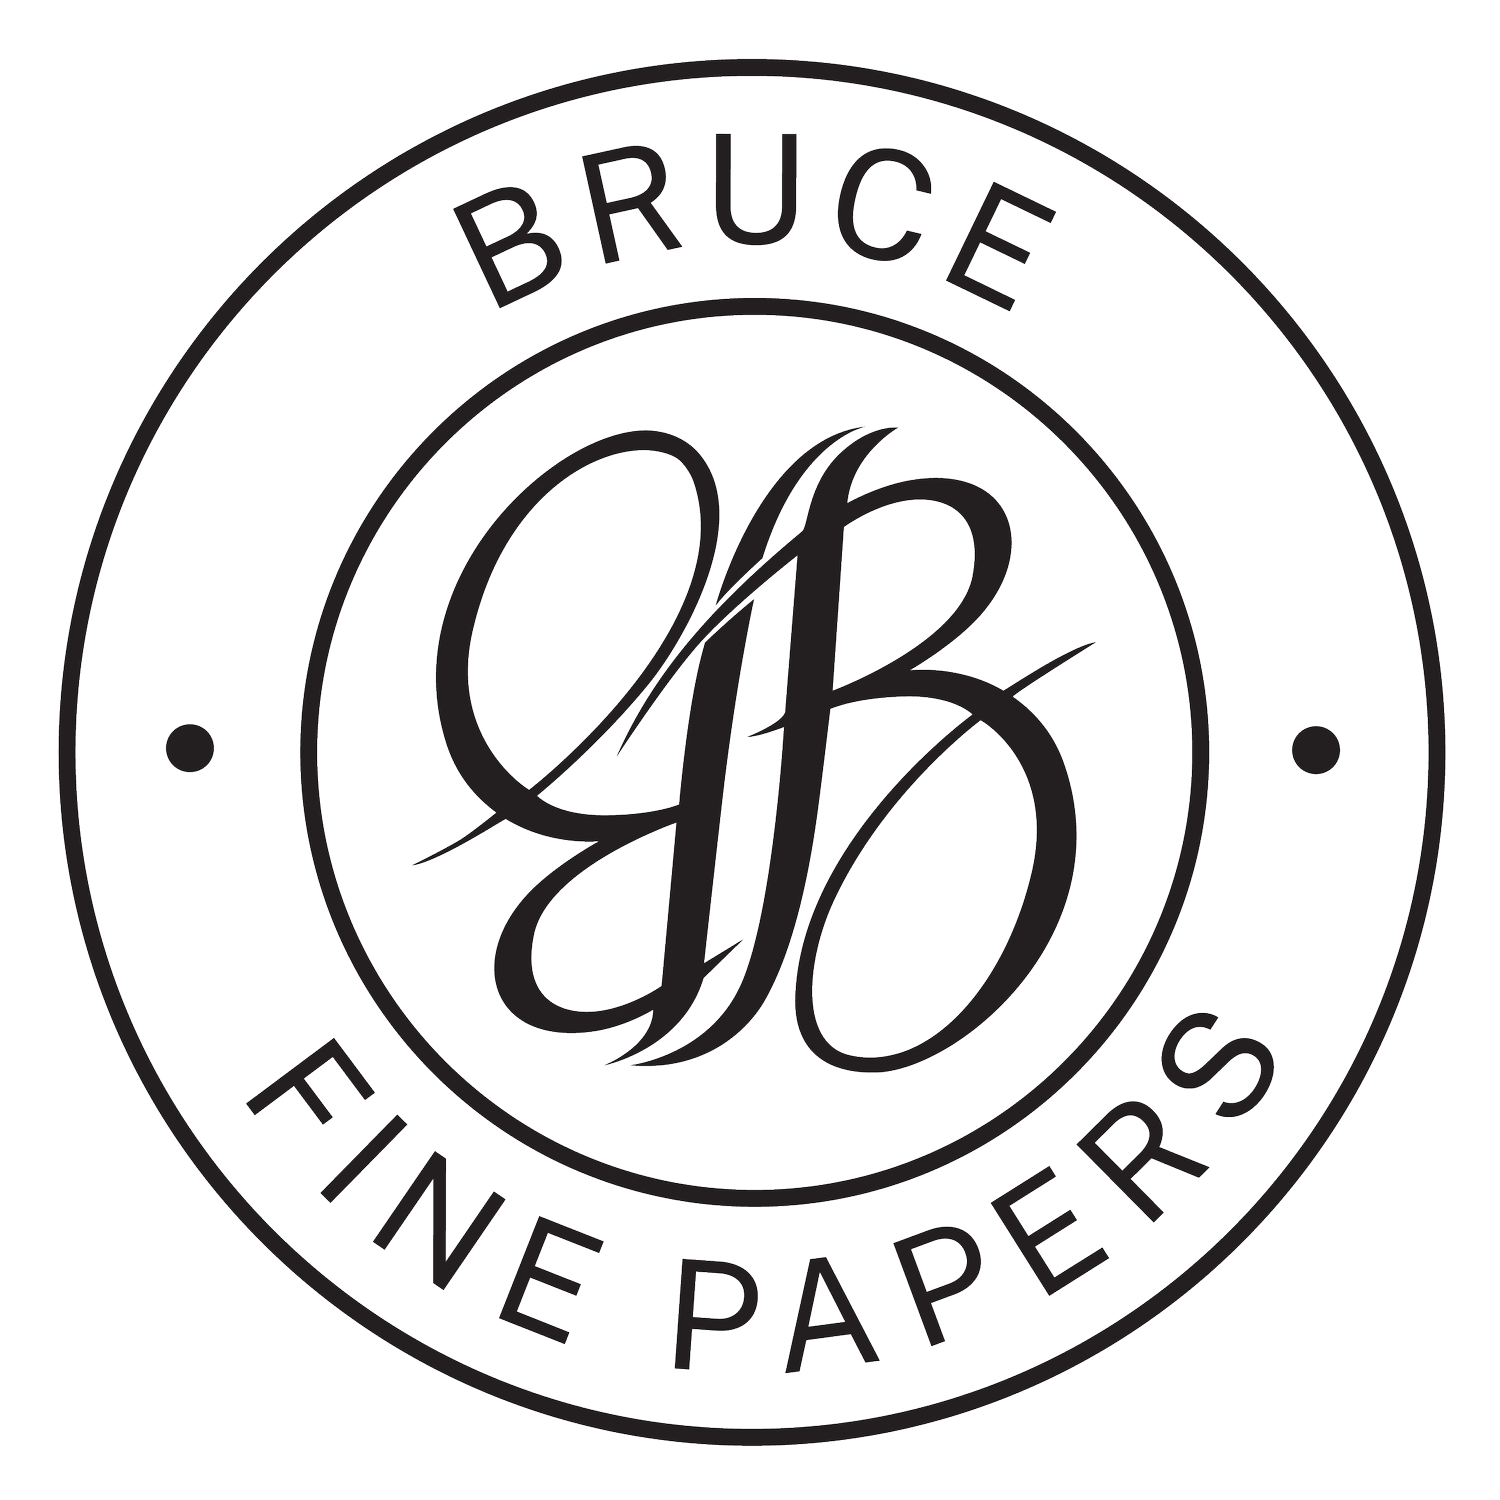 BRUCE FINE PAPERS